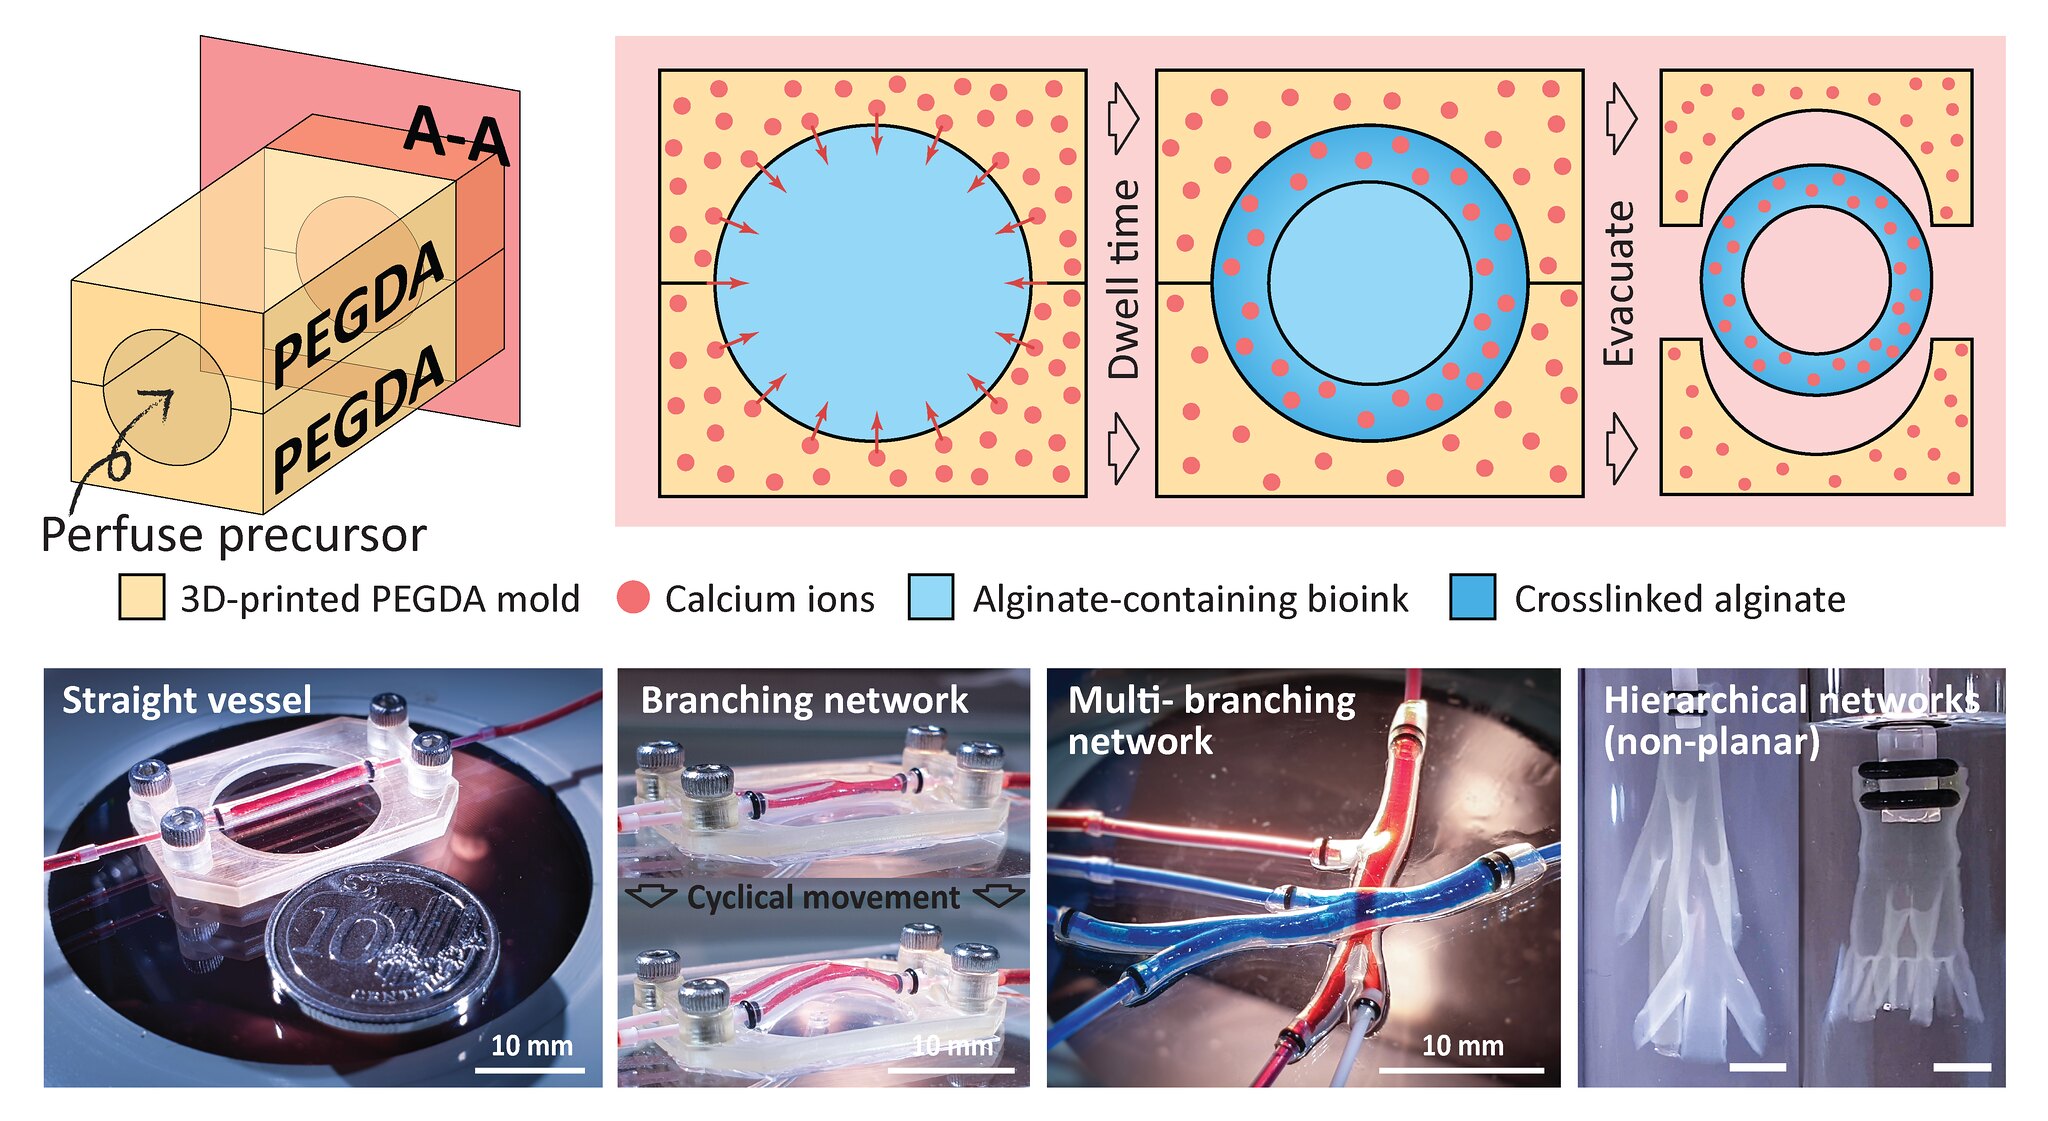 Paper on biomimetic vasculature published